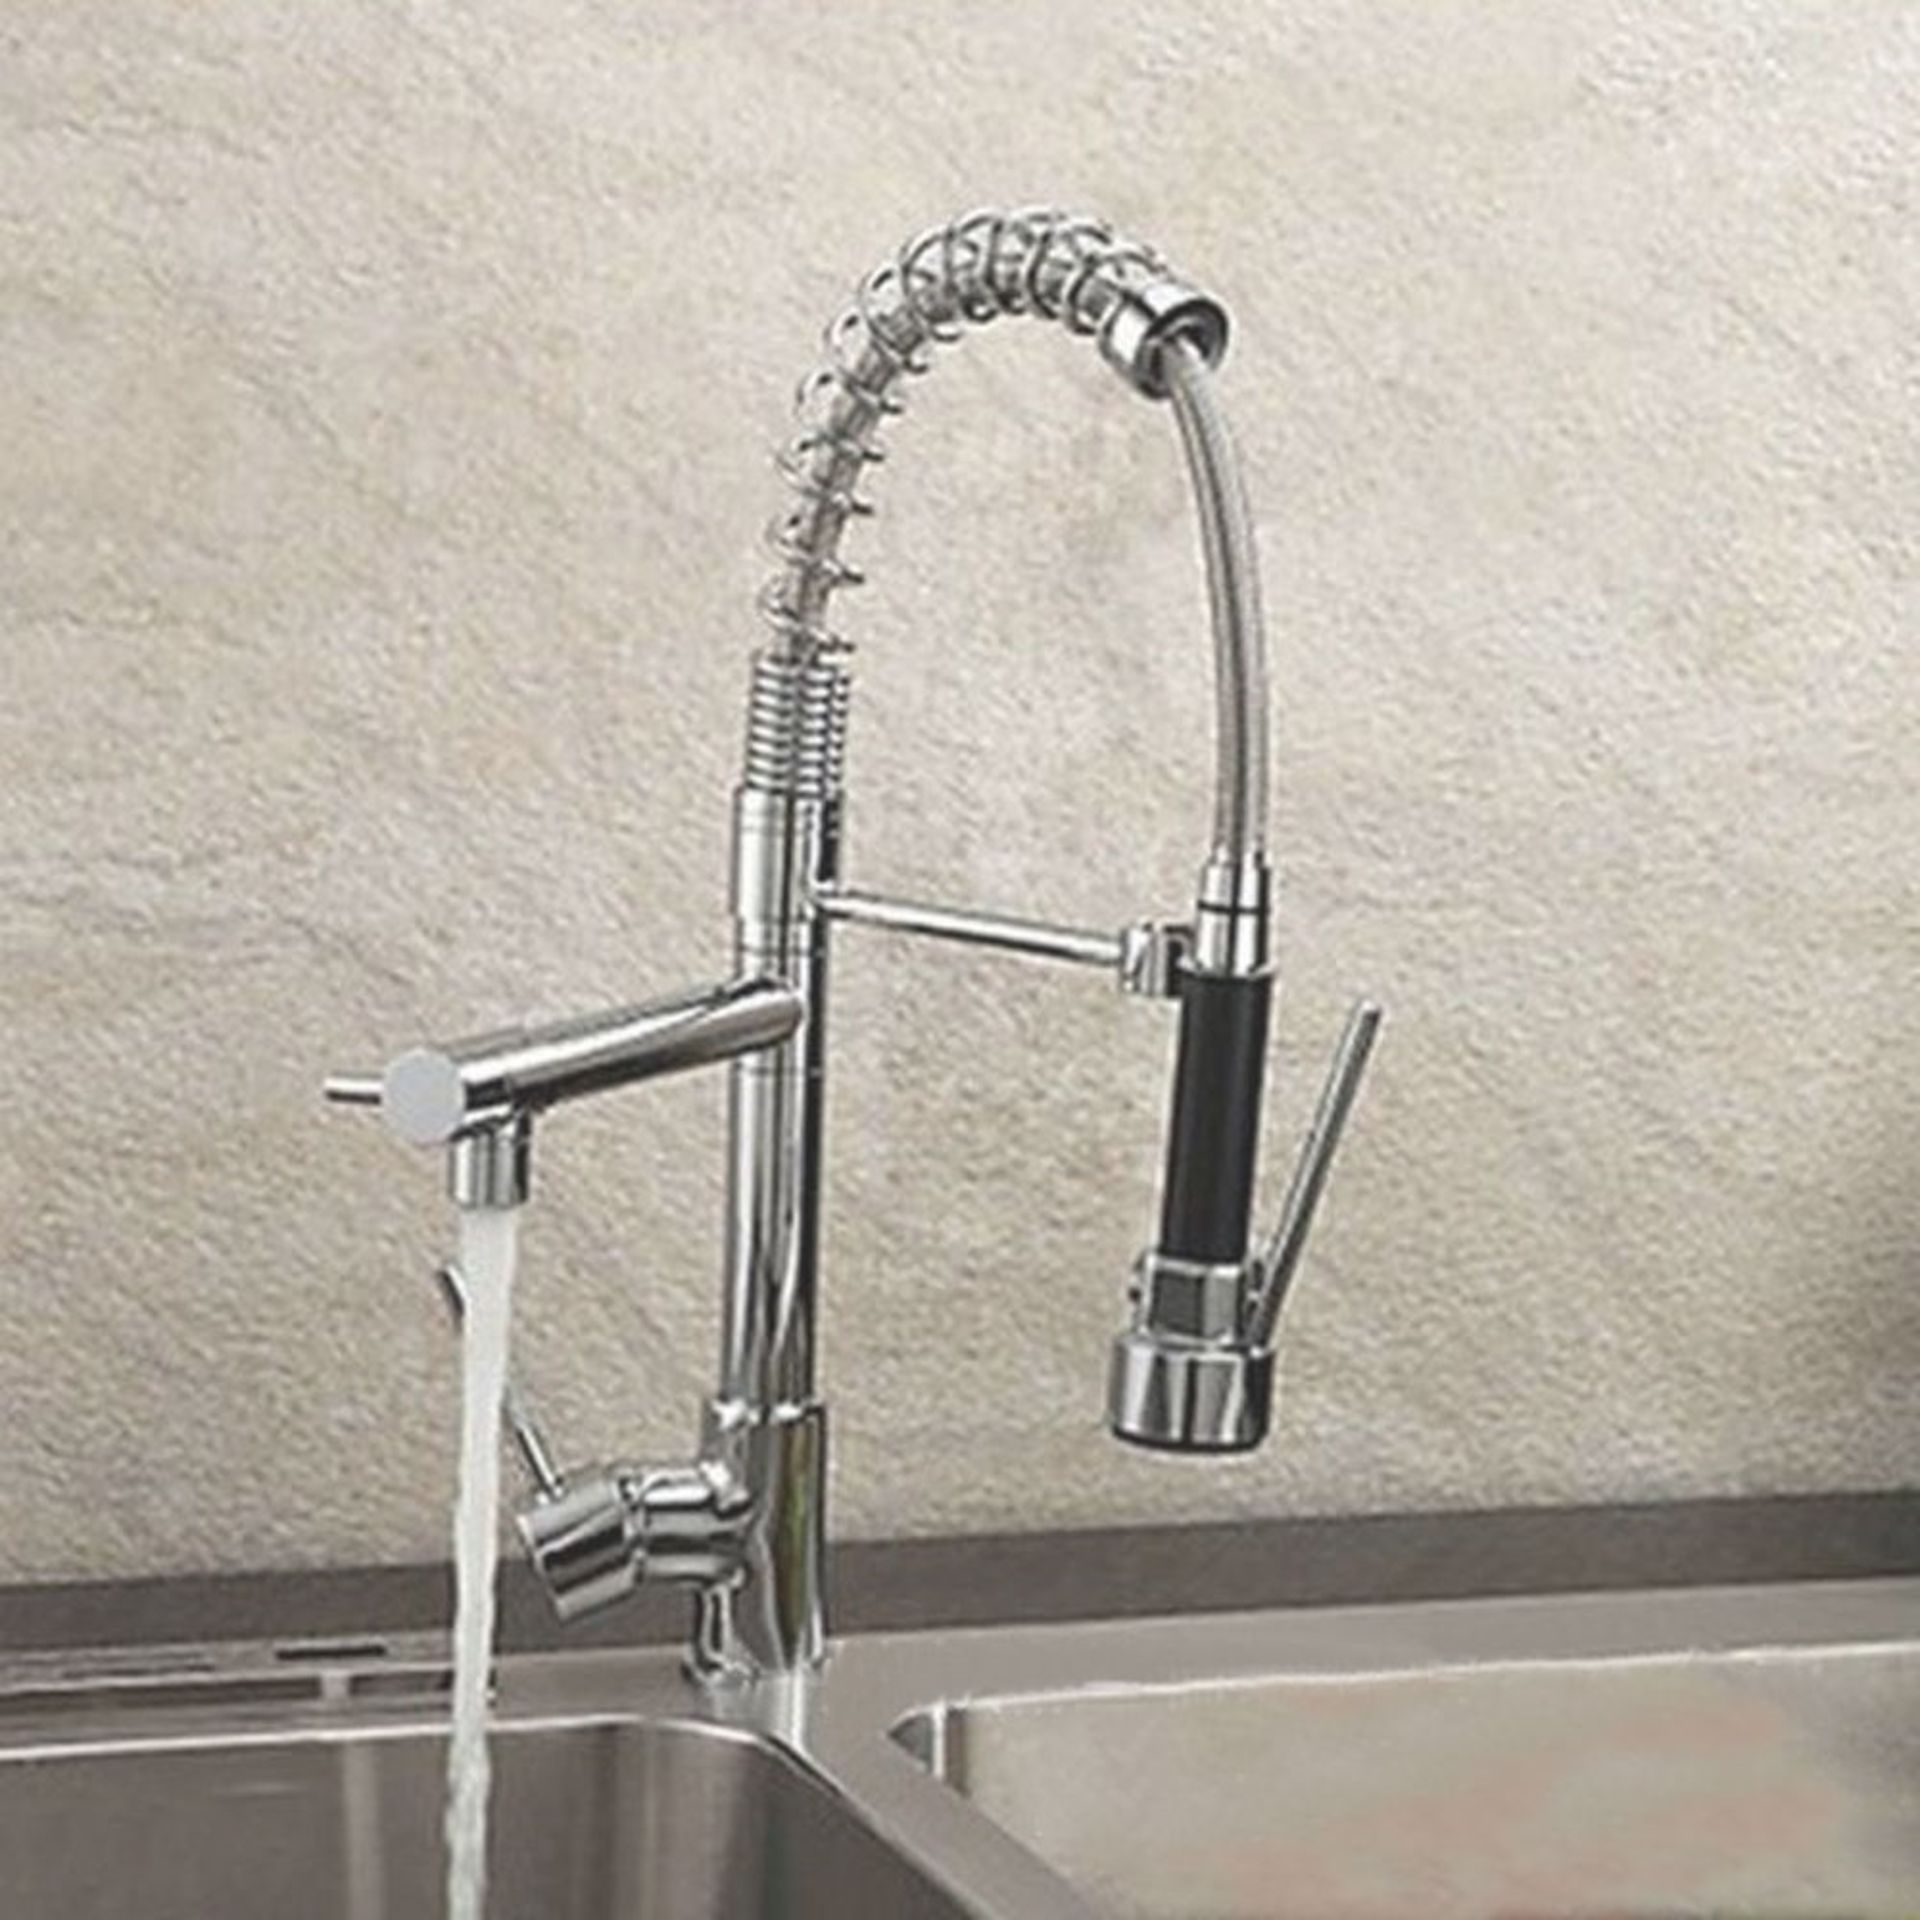 (PP222) Bentley Modern Monobloc Chrome Brass Pull Out Spray Mixer Tap. RRP £349.99. This tap i...